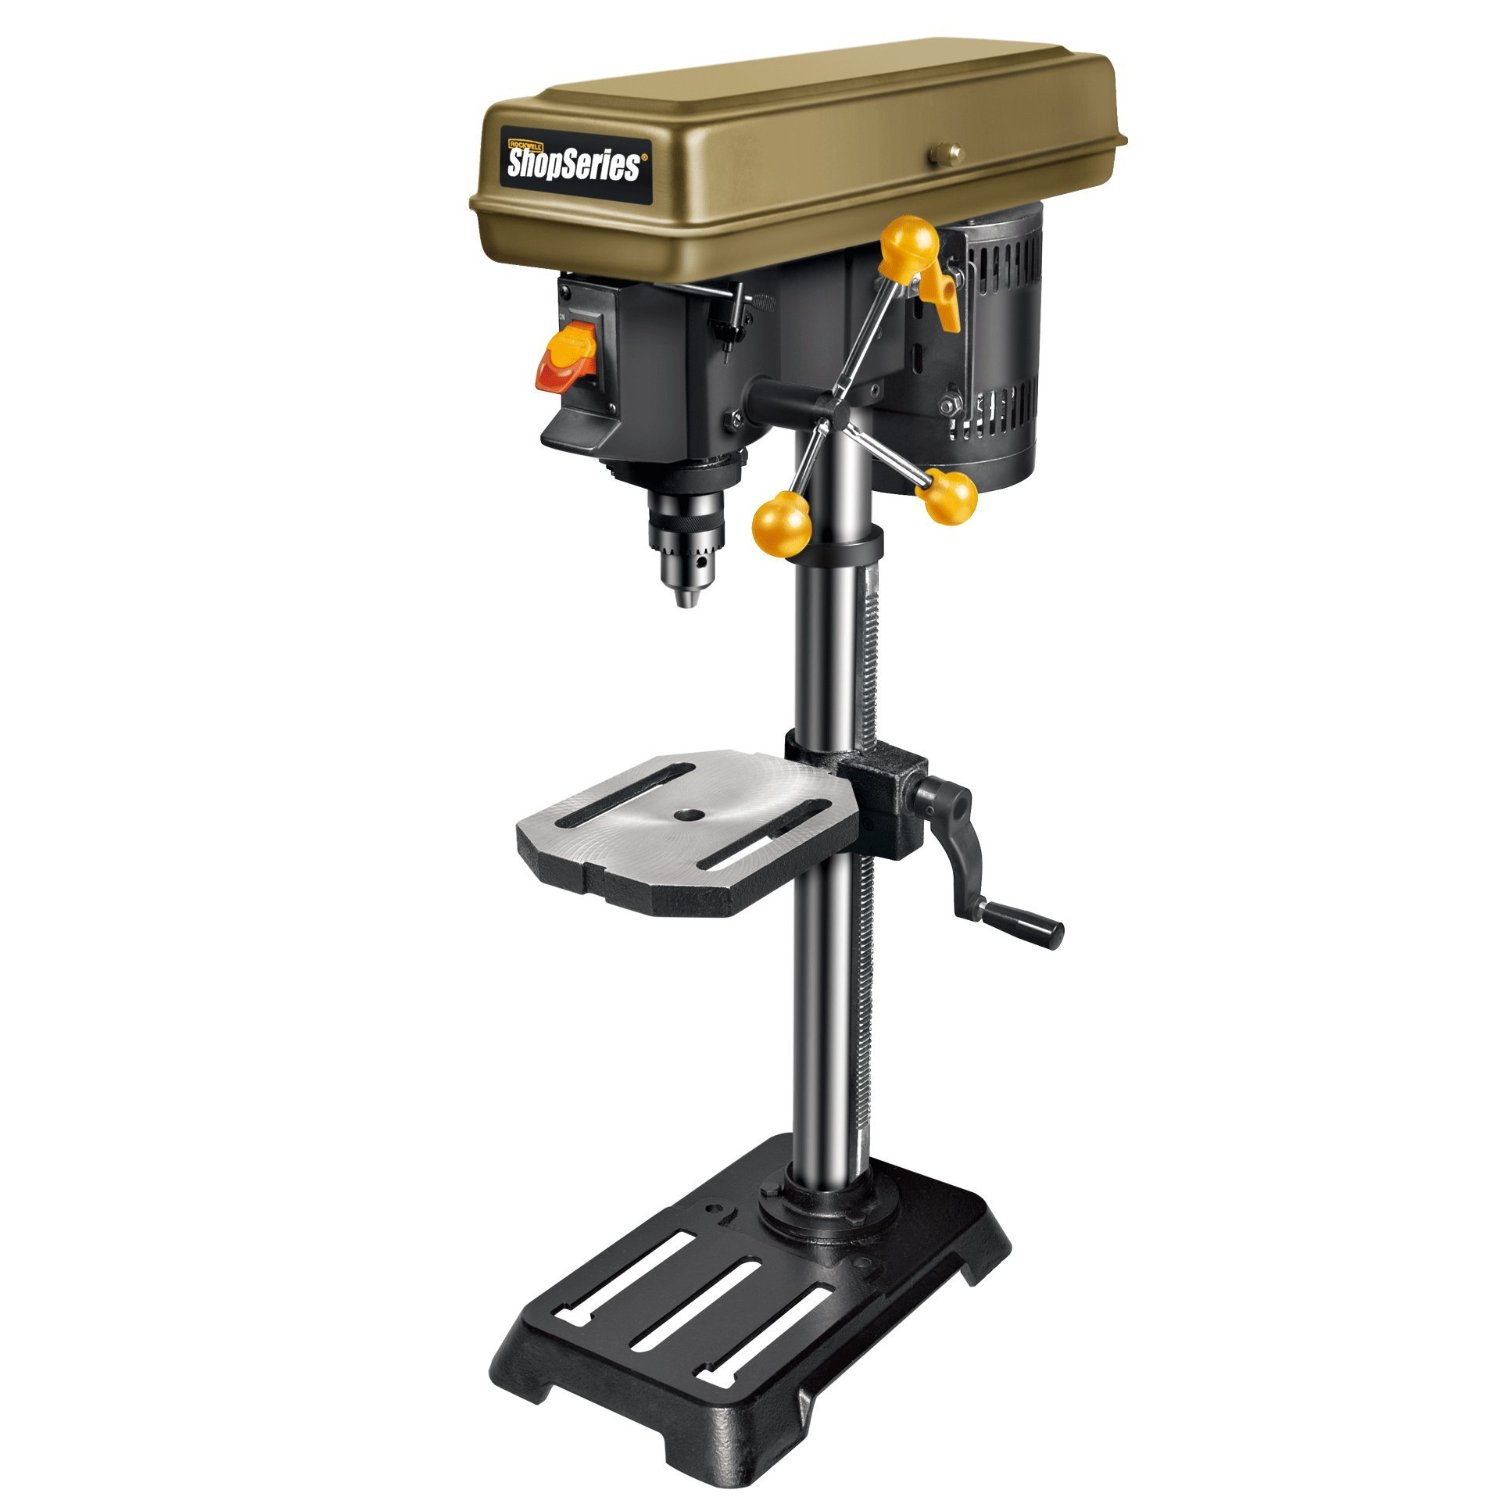 Rockwell RK7033 Shop Series Drill Press Replaces